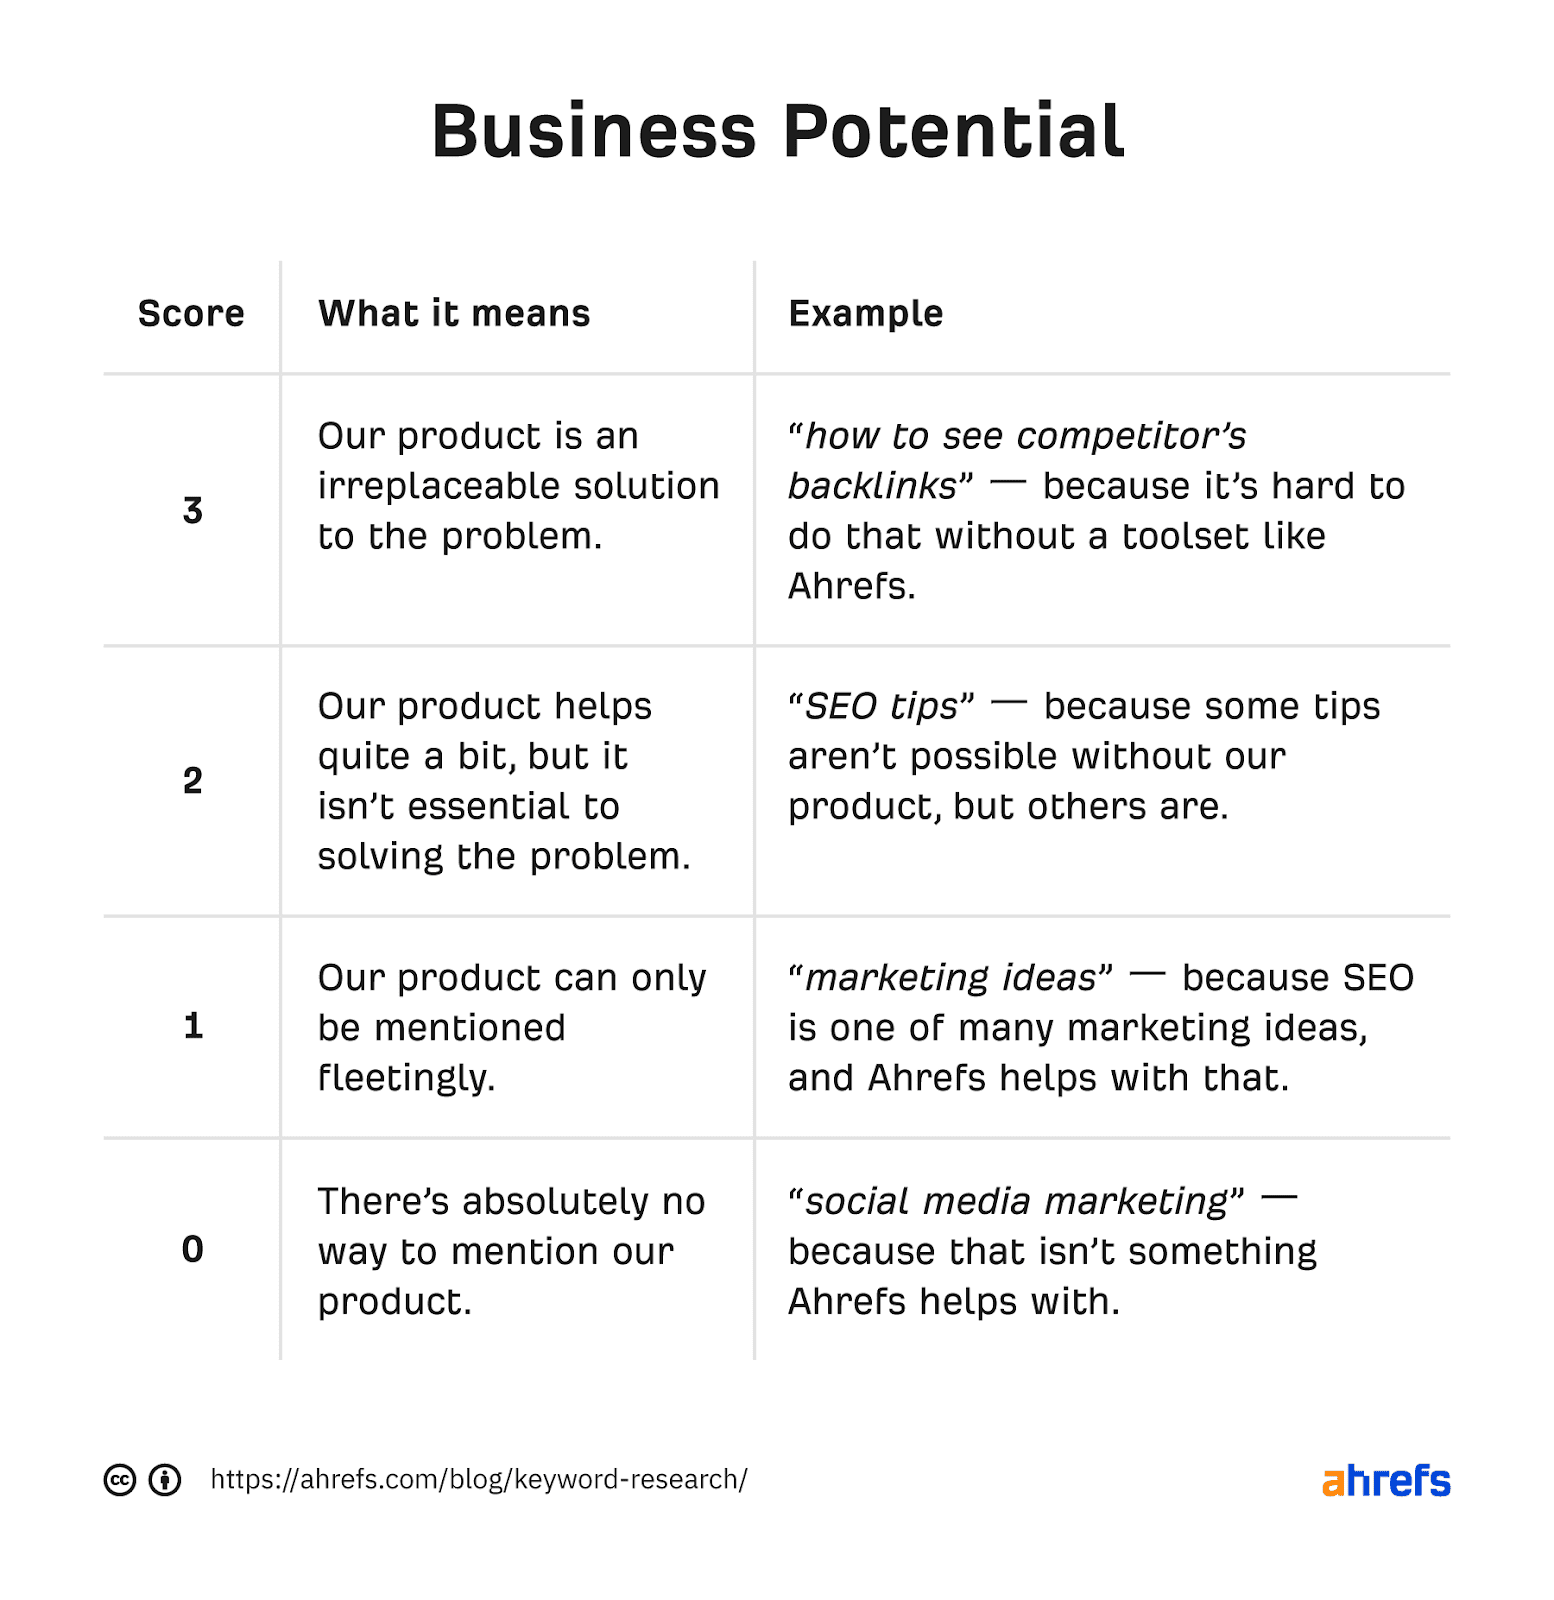 A table showing how to score a topic's business potential